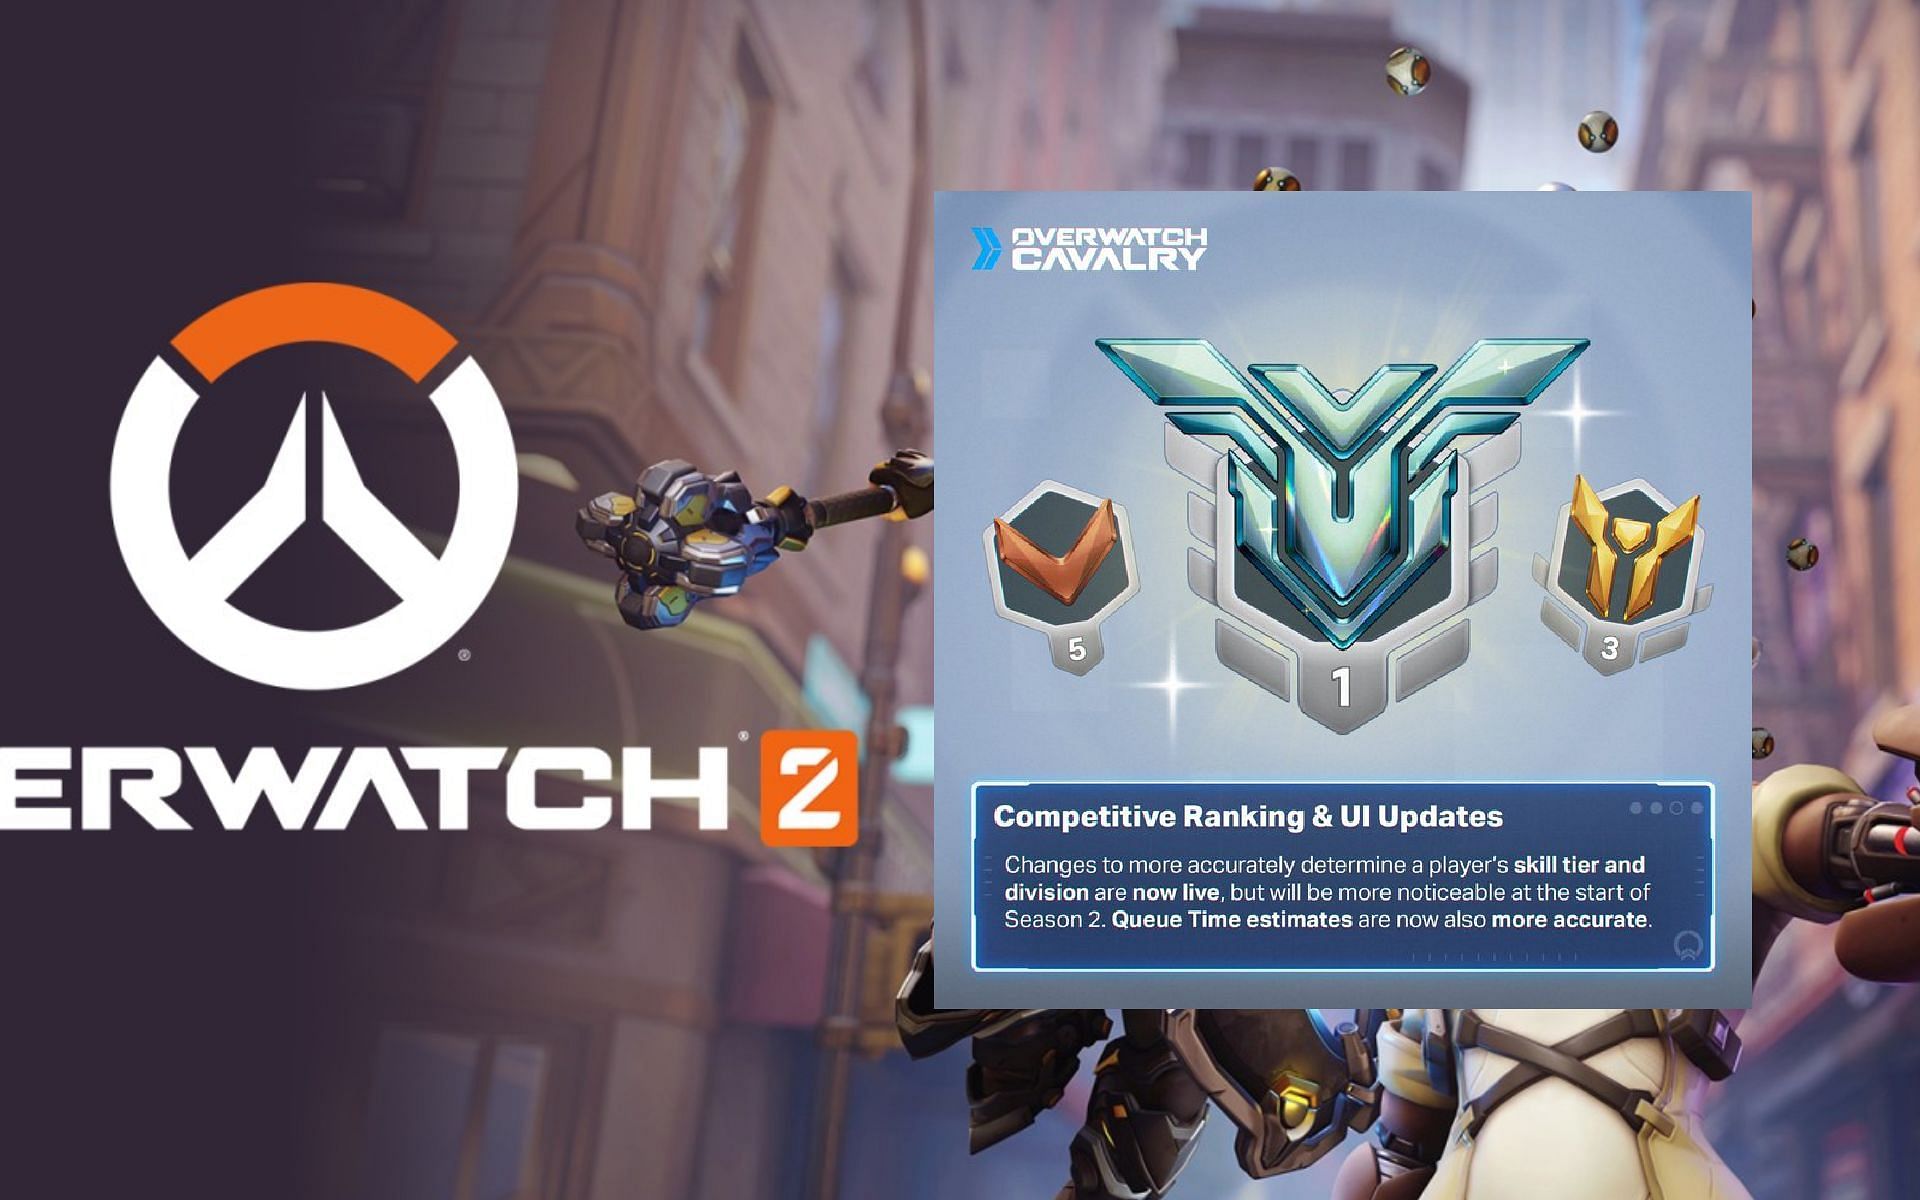 New Overwatch update introduces changes UI and Ranking system